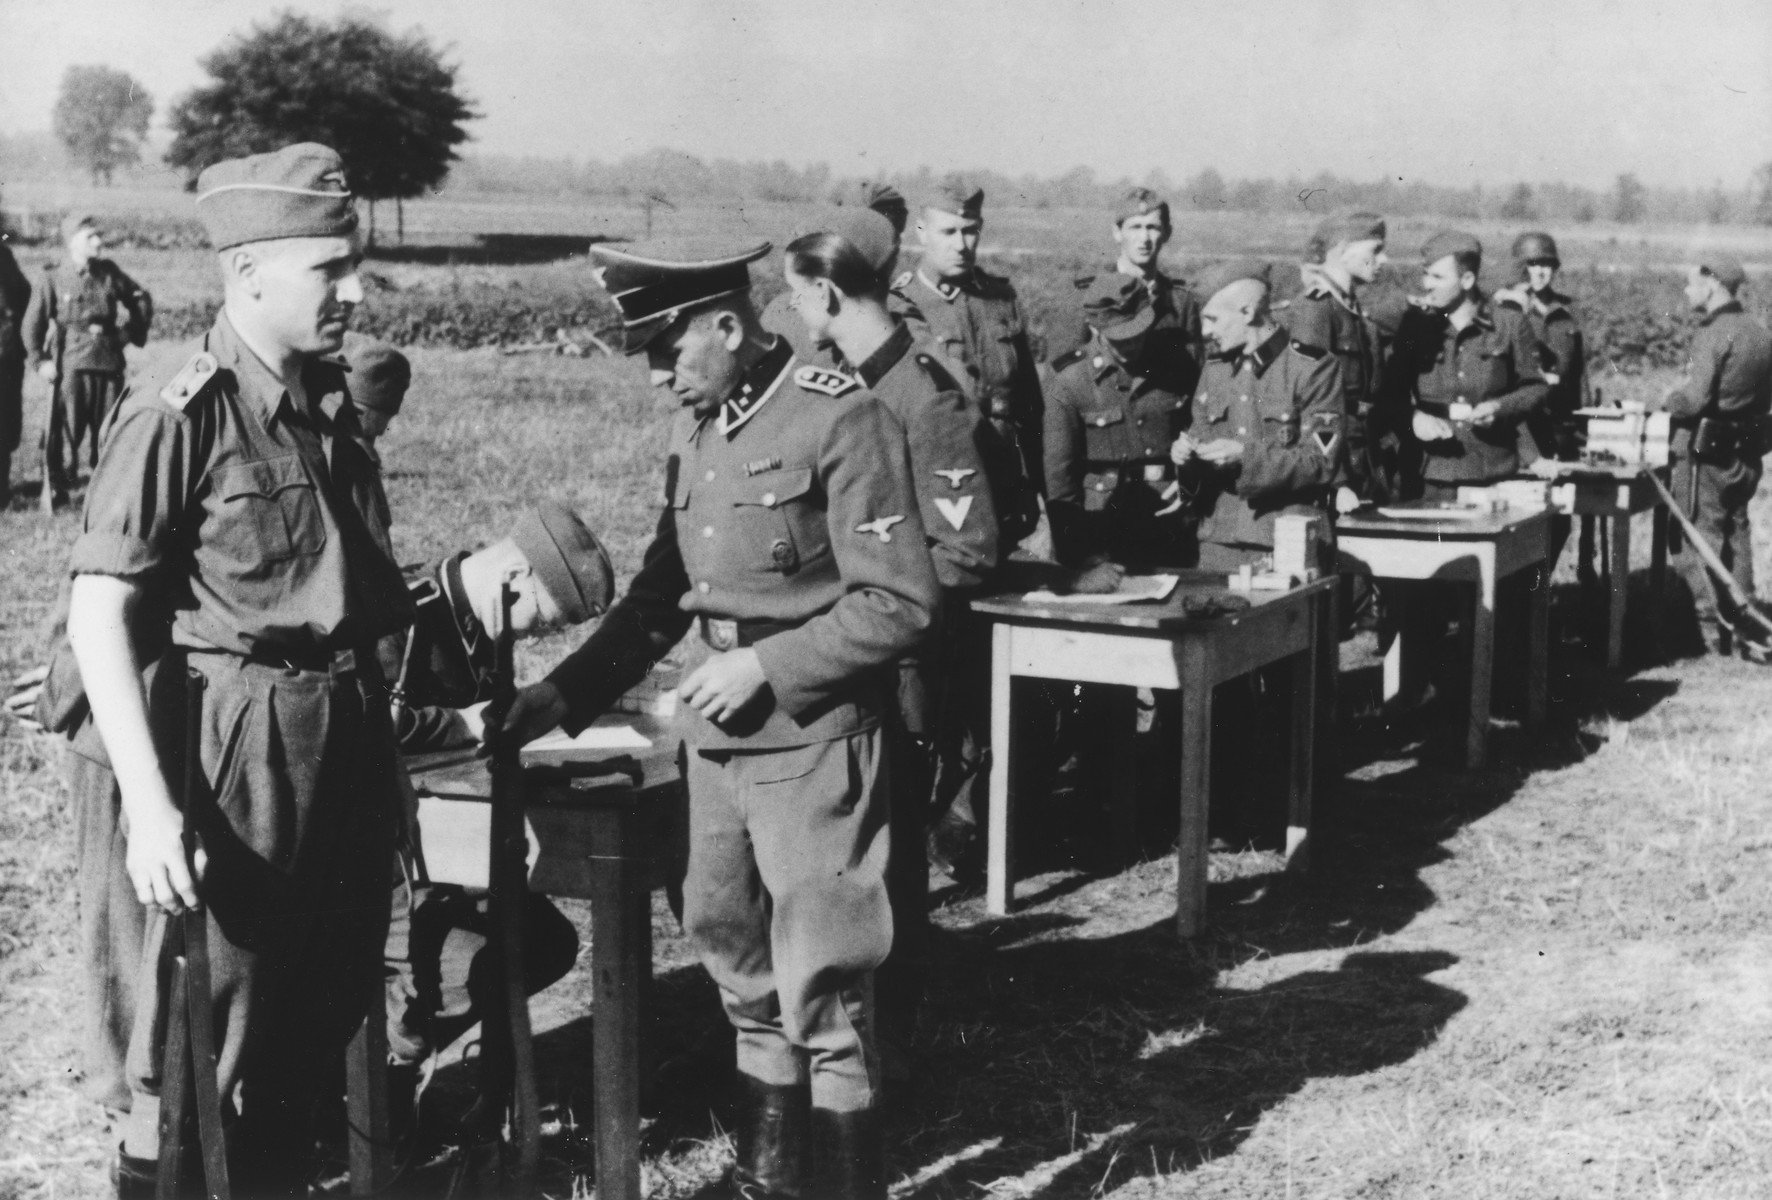 SS officers gather for shooting practice. On the far left is Karl Hoecker.

The original caption reads "Auf dem Schiessstand" (at the firing range).